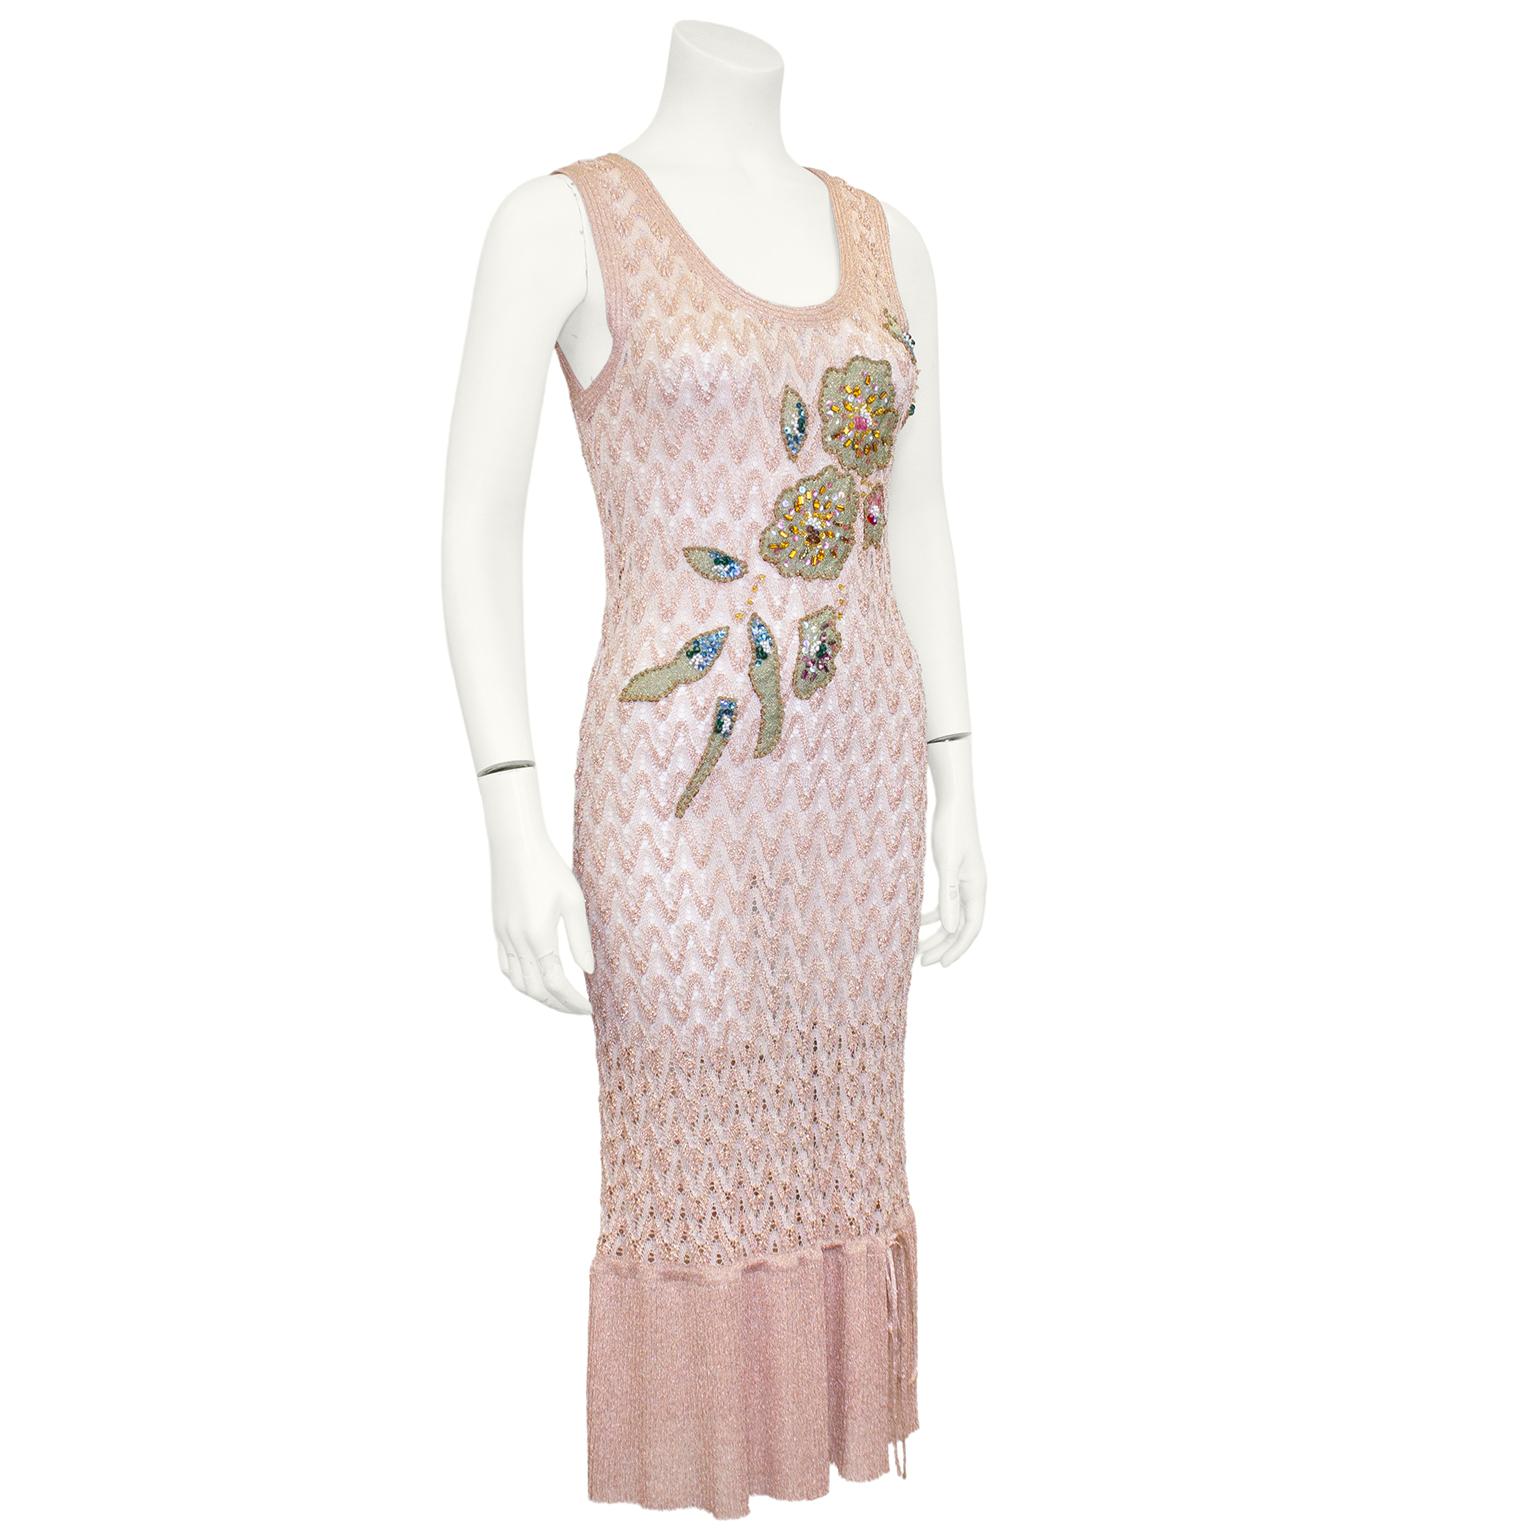 1990s Missoni Metallic Knit Blush Pink Dress and Cardigan  In Good Condition For Sale In Toronto, Ontario